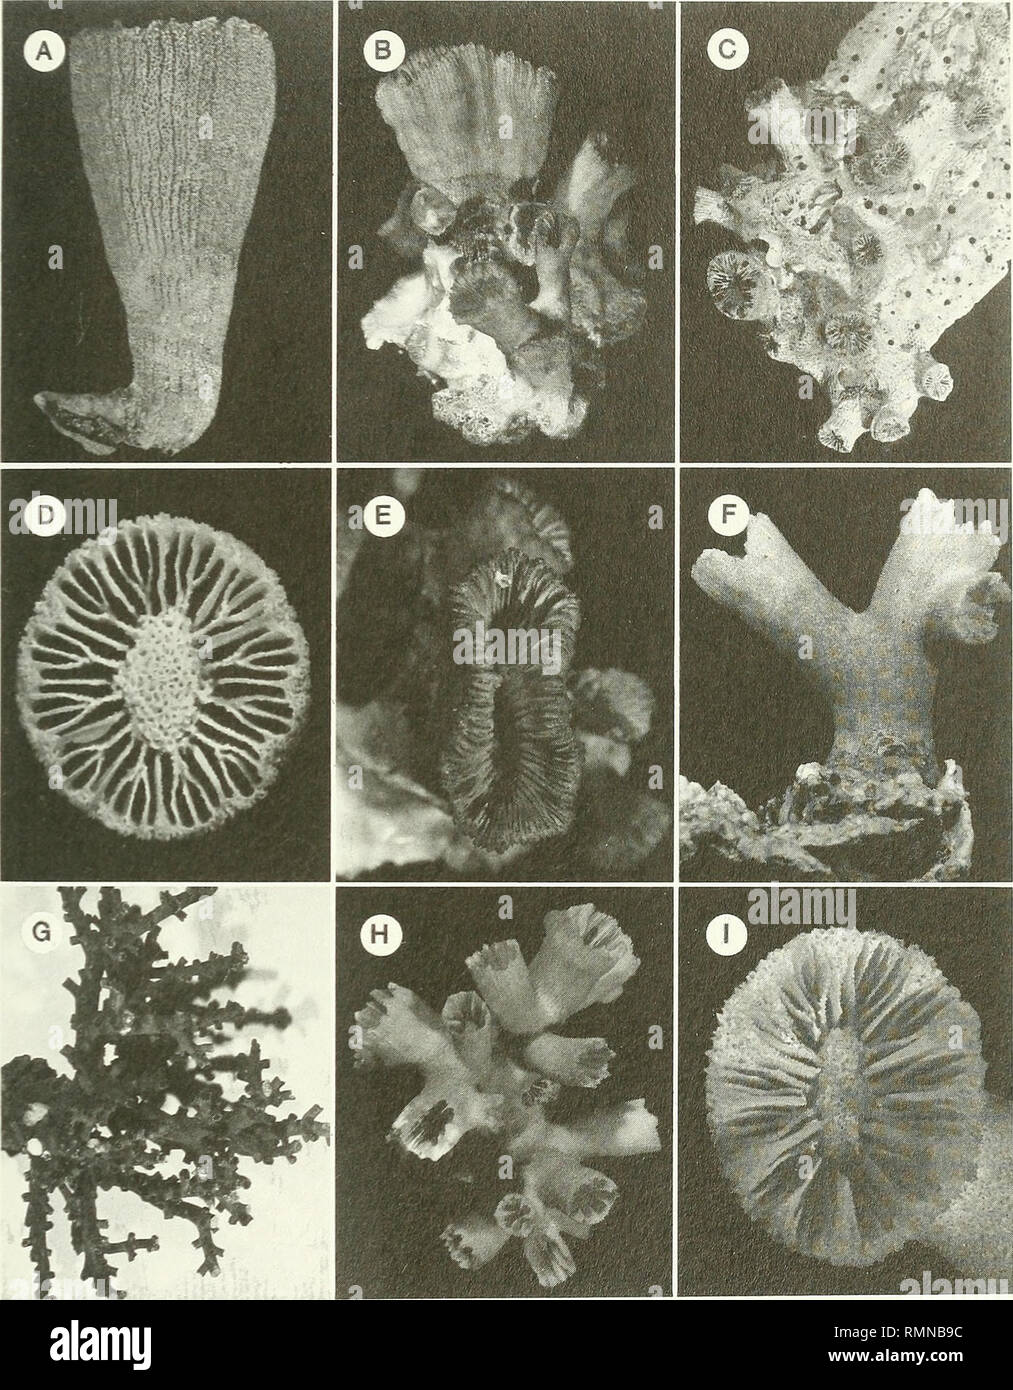 . Annals of the South African Museum = Annale van die Suid-Afrikaanse Museum. Natural history. AZOOXANTHELLATE SCLERACTINIA FROM THE SOUTH-WEST INDIAN OCEAN 283 . I '.- ?'&quot;, . !. Fig. 13. A, D. Balanophyllia diffusa, Cr. 329-15. USNM 78594, lateral and calicular views. A x 2,7, Dx3,6. B, E. Rhizopsammia compacta, MN-ZA49 (USNM 91793) lateral view of a colony and calice of largest corallite. B x 1,1, Ex 1,8. C. Rhizopsammia annae, AB-391J, USNM 91790, a small colony, x 1,4. F, I. Dendrophyllia sp. cf. D. horsti, MN-ZC11, USNM 91819, lateral view of colony and calice of a corallite. F x 1,2 Stock Photo